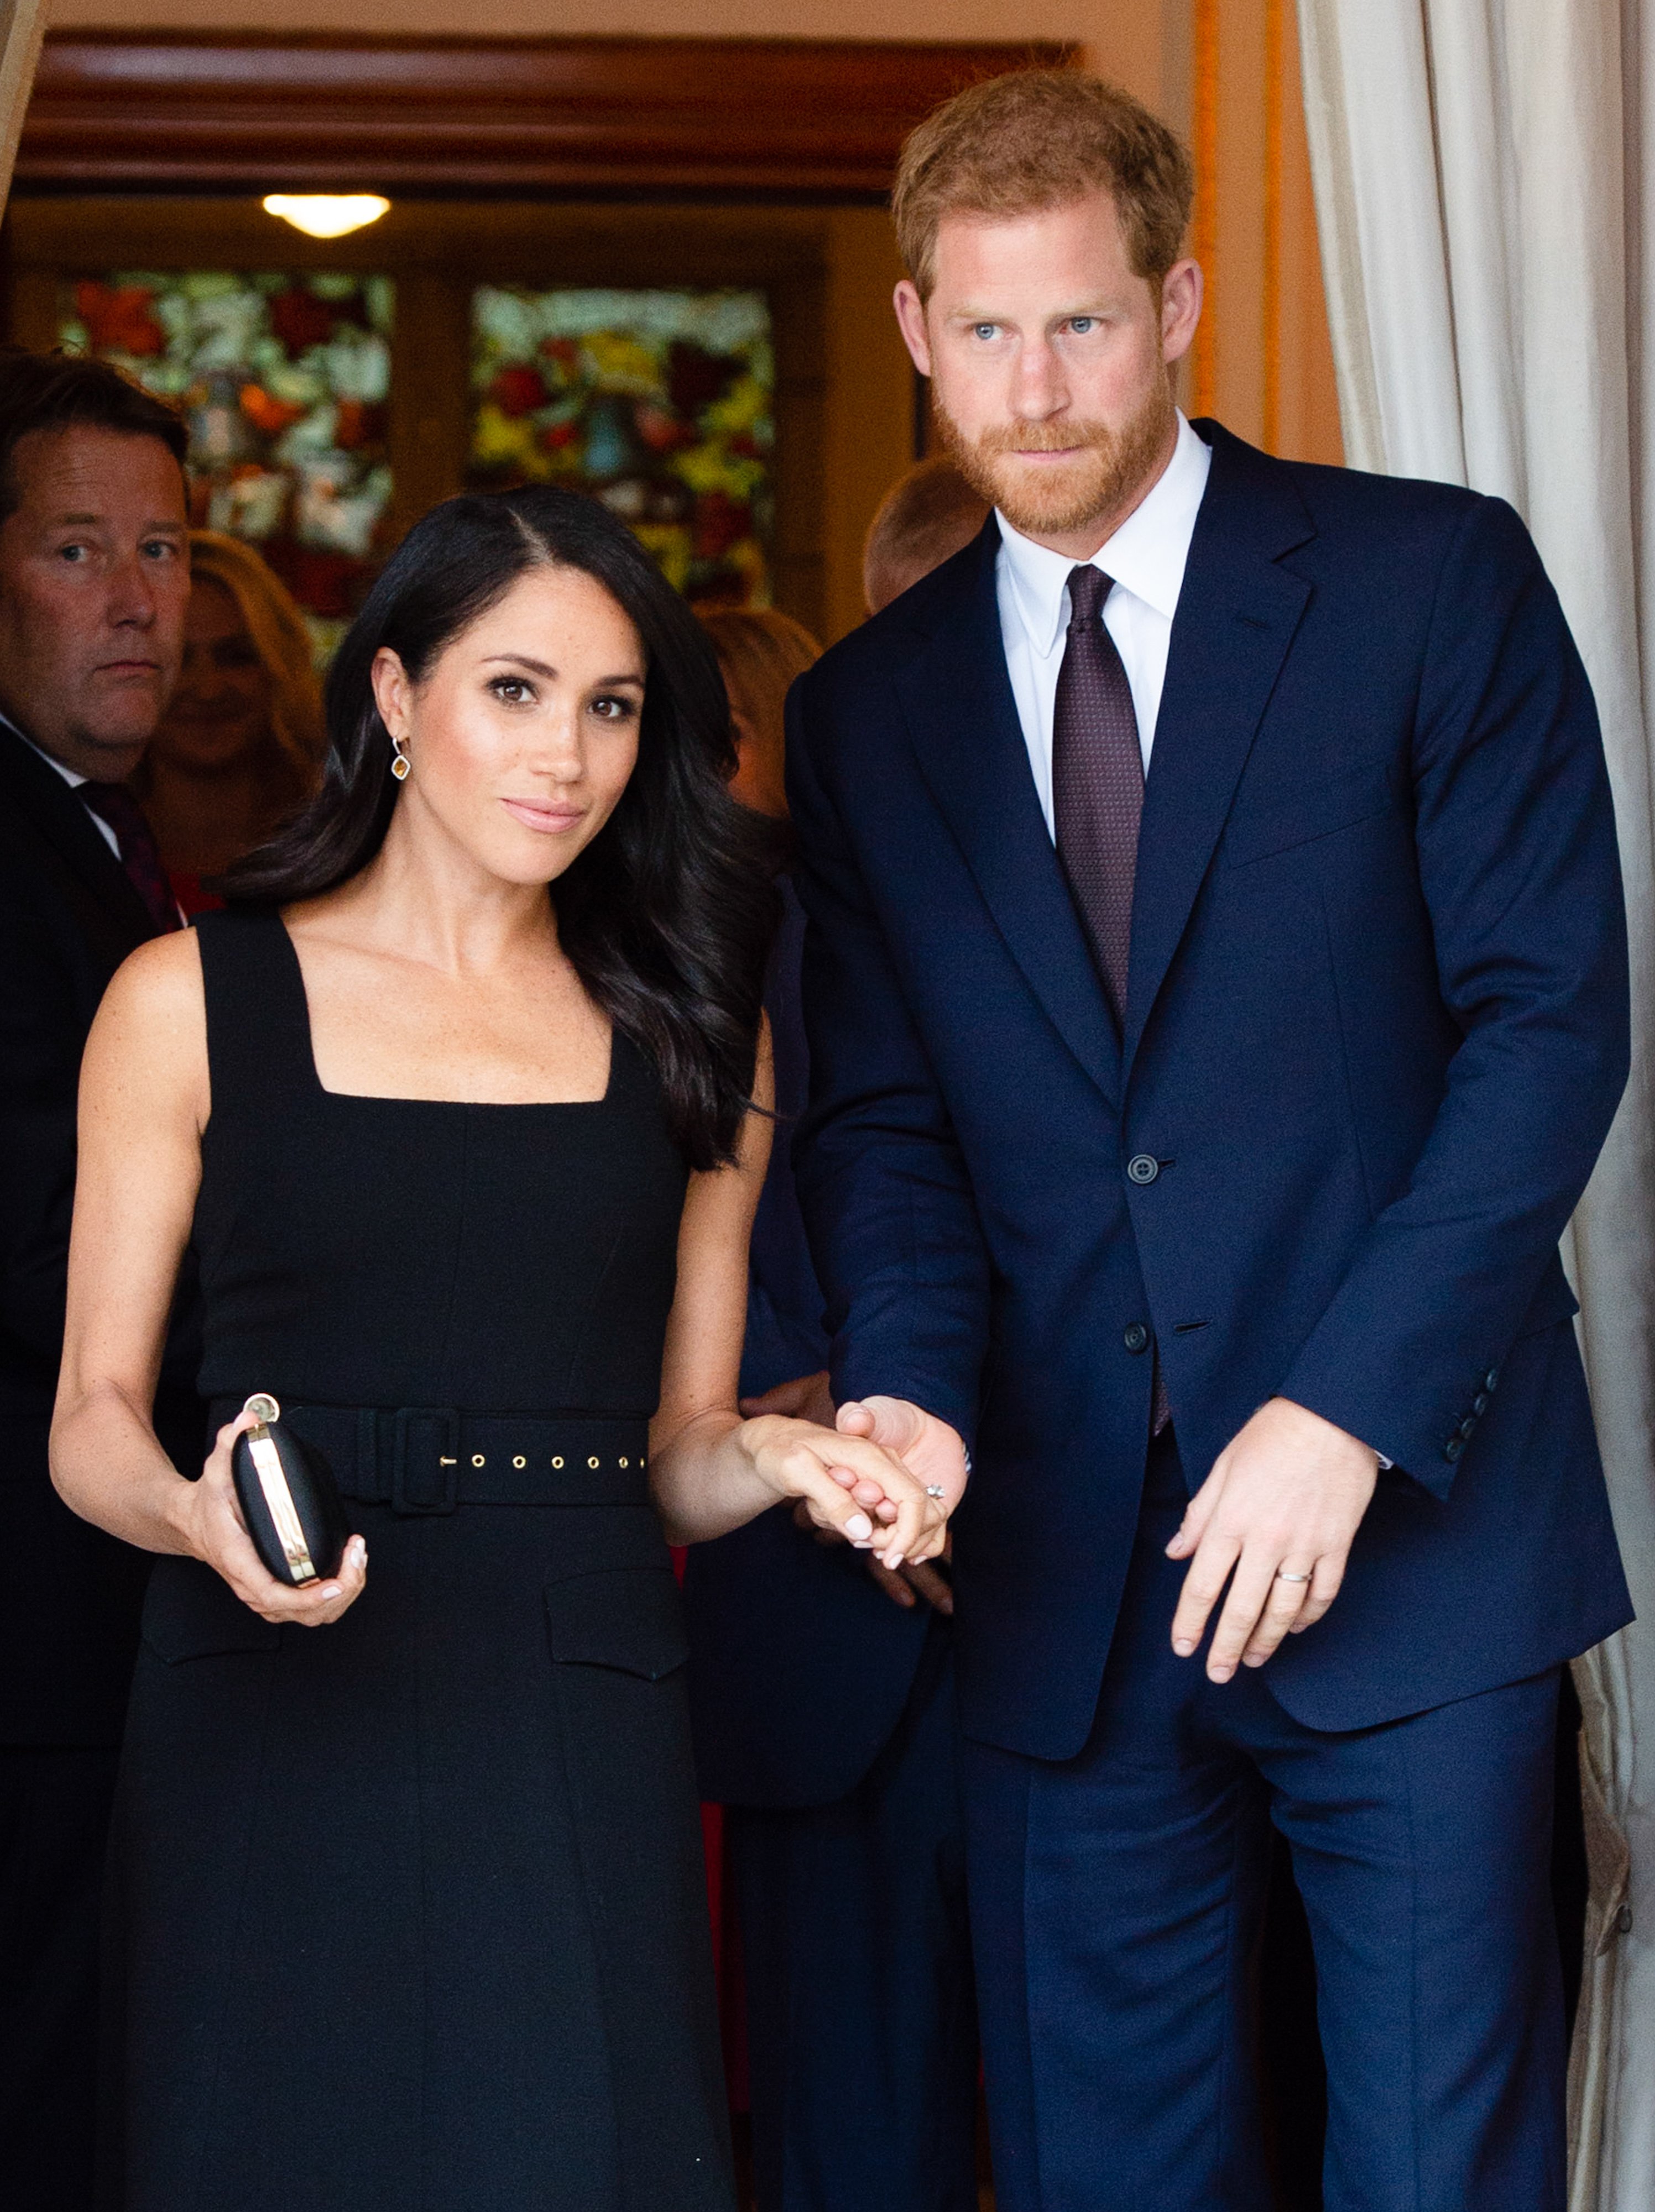 Prince Harry, The Duke of Sussex and Meghan, The Duchess of Sussex attend a summer party at the British Ambassador's residence at Glencairn House during their visit to Ireland on July 10, 2018 in Dublin, Ireland.  Source: Getty Images 